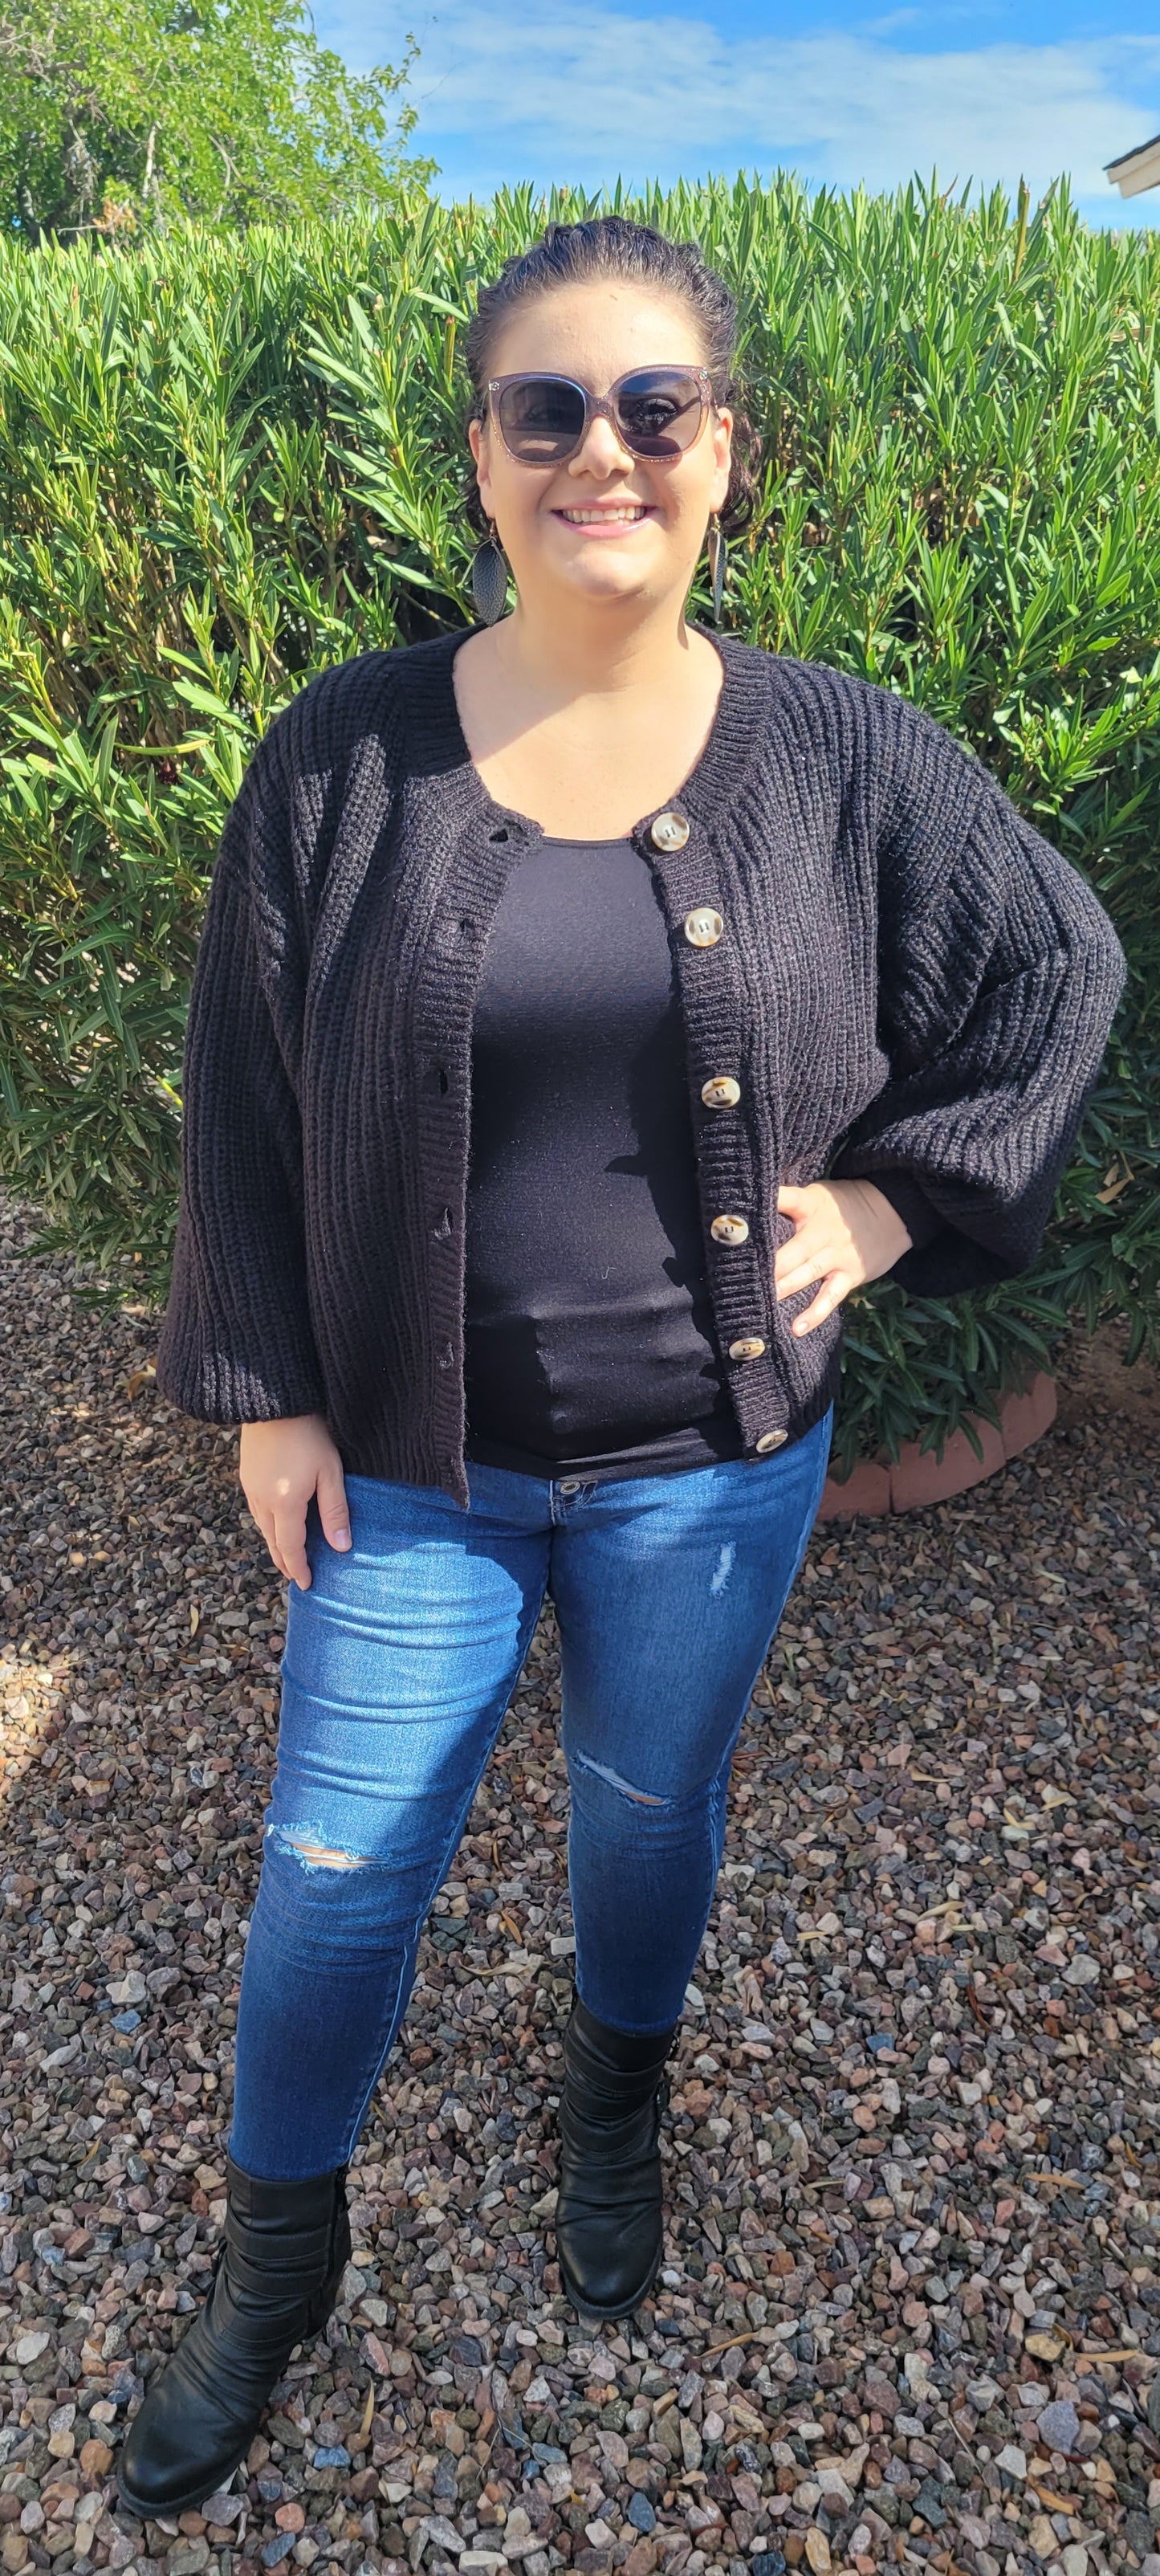 Who says you can’t look fabulous in a basic black sweater! This black cardigan features a button down front with balloon sleeves, and cinched cuffs and hemline. Nice thick sweater material, you will be sure to stay warm. This sweater is very versatile, and can be dressed up, worn to the office, or everyday use. Sizes small through x-large.